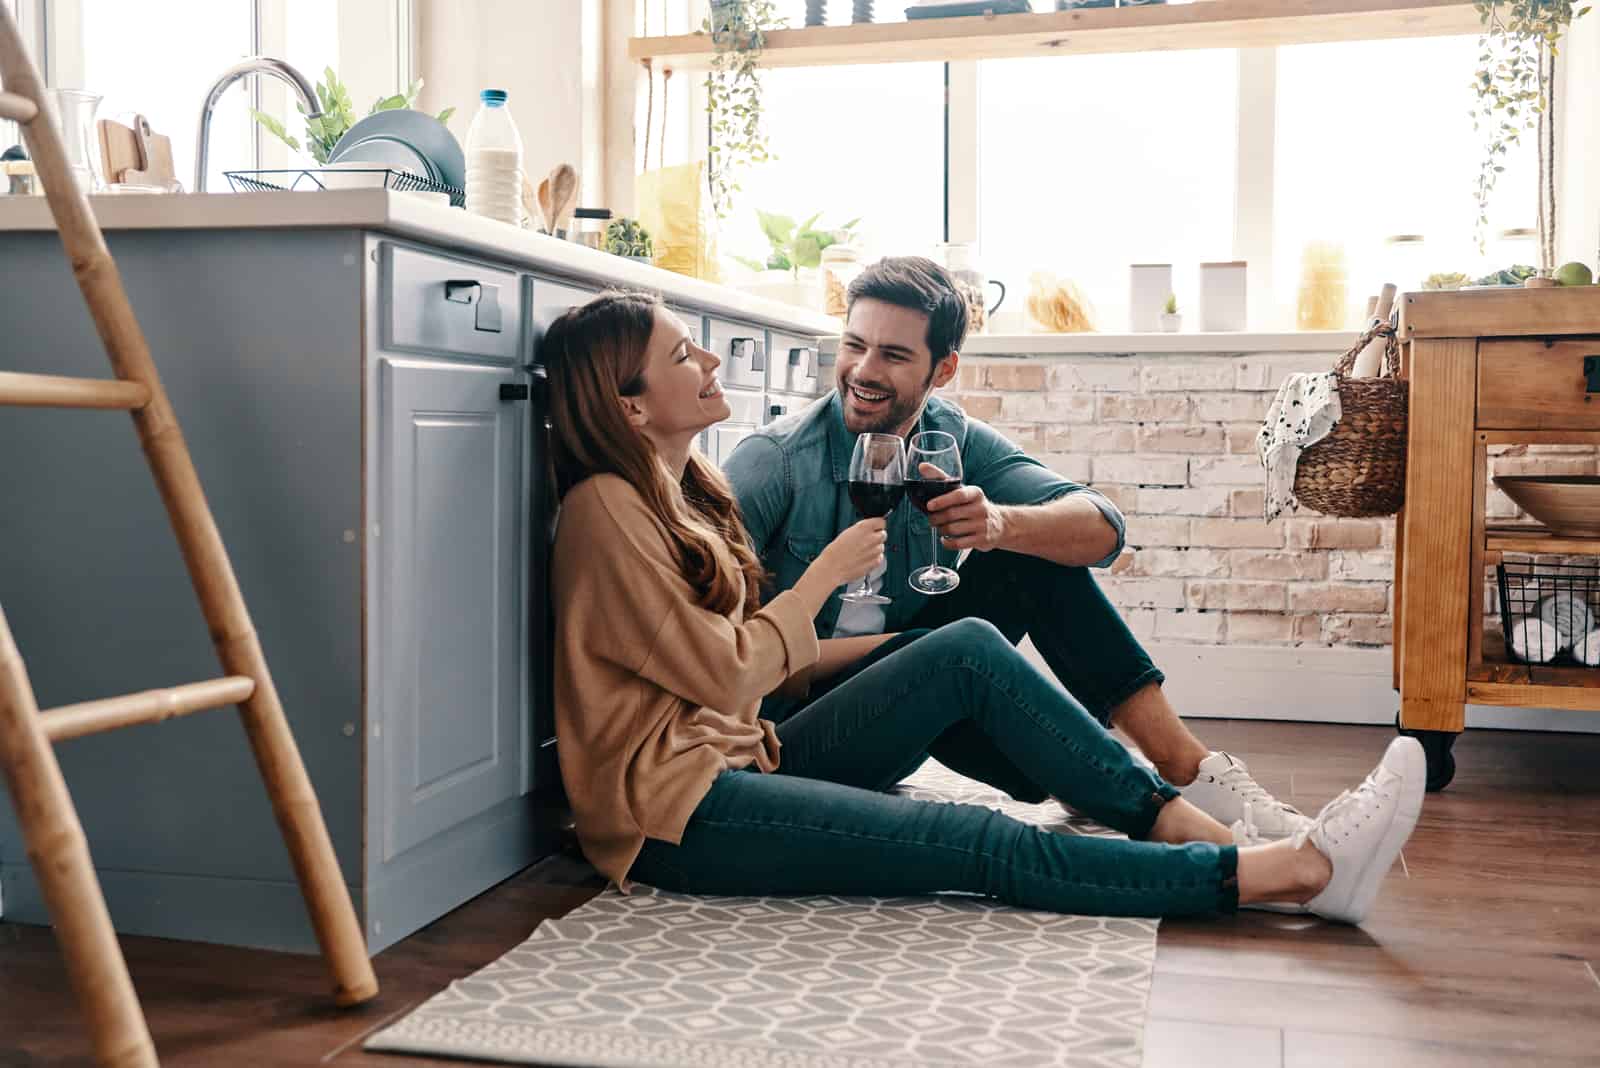 a smiling man and woman sit on the floor and drink wine